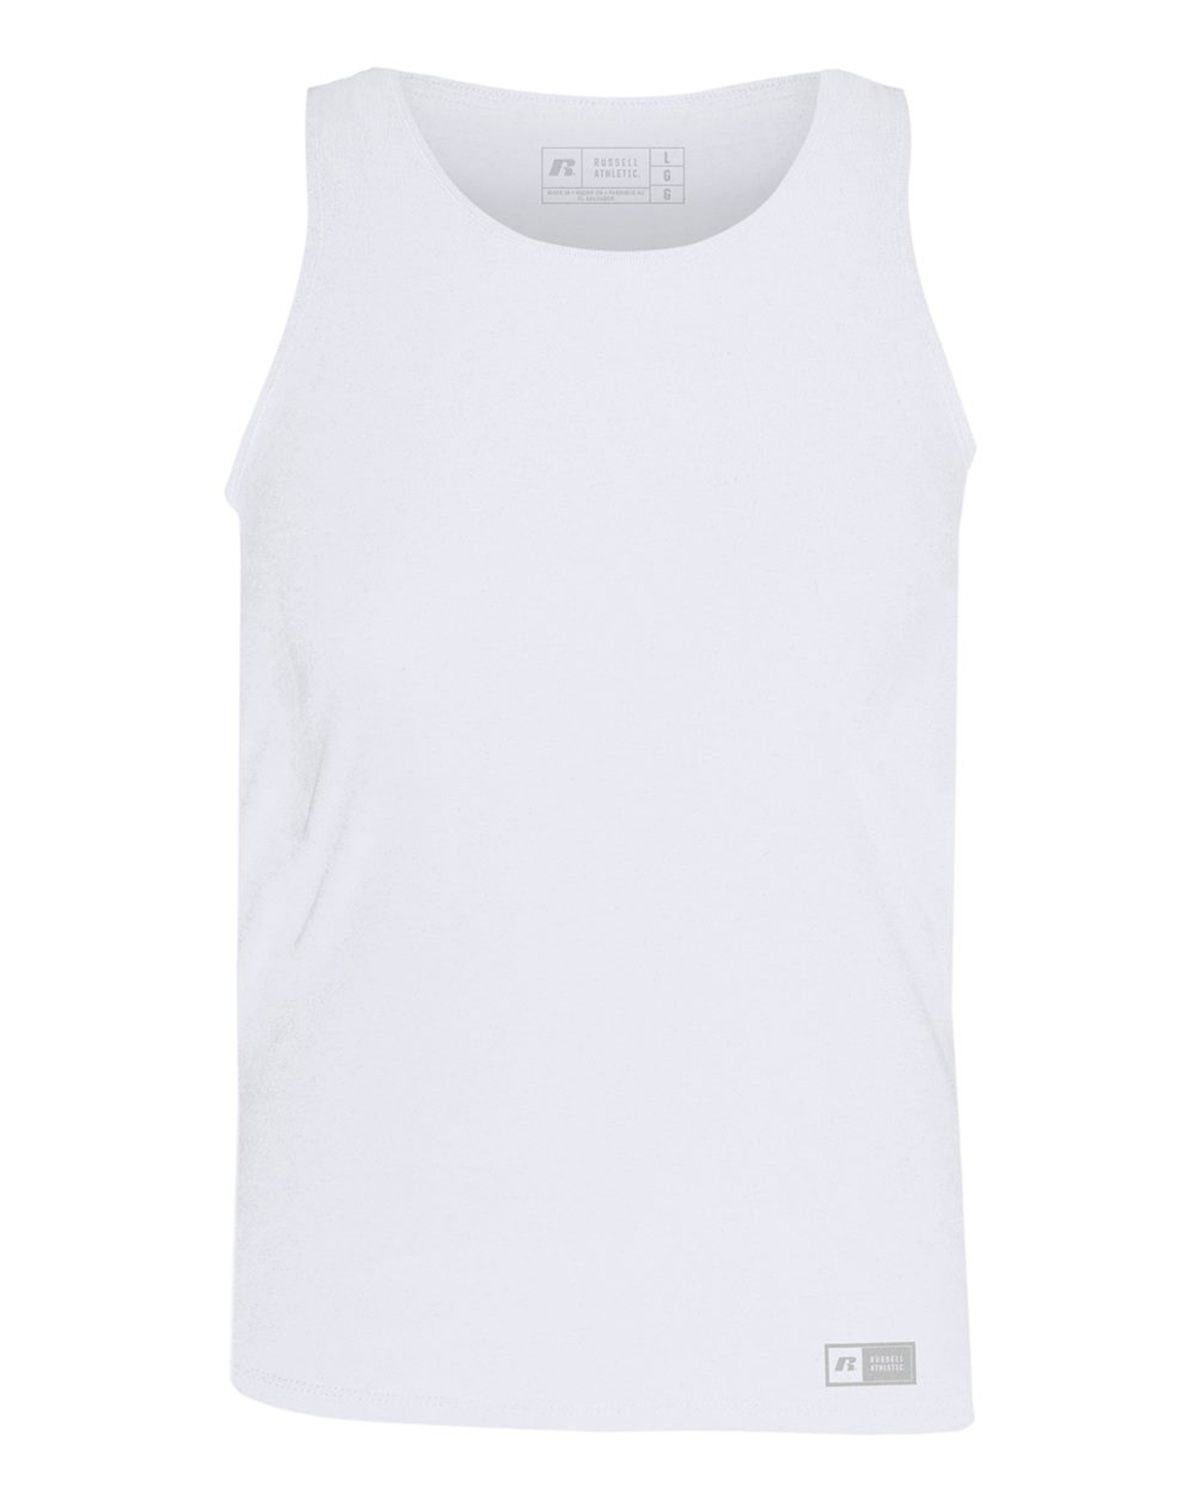 Size Chart for Russell Athletic 64TTTM Men's Essential Jersey Tank Top